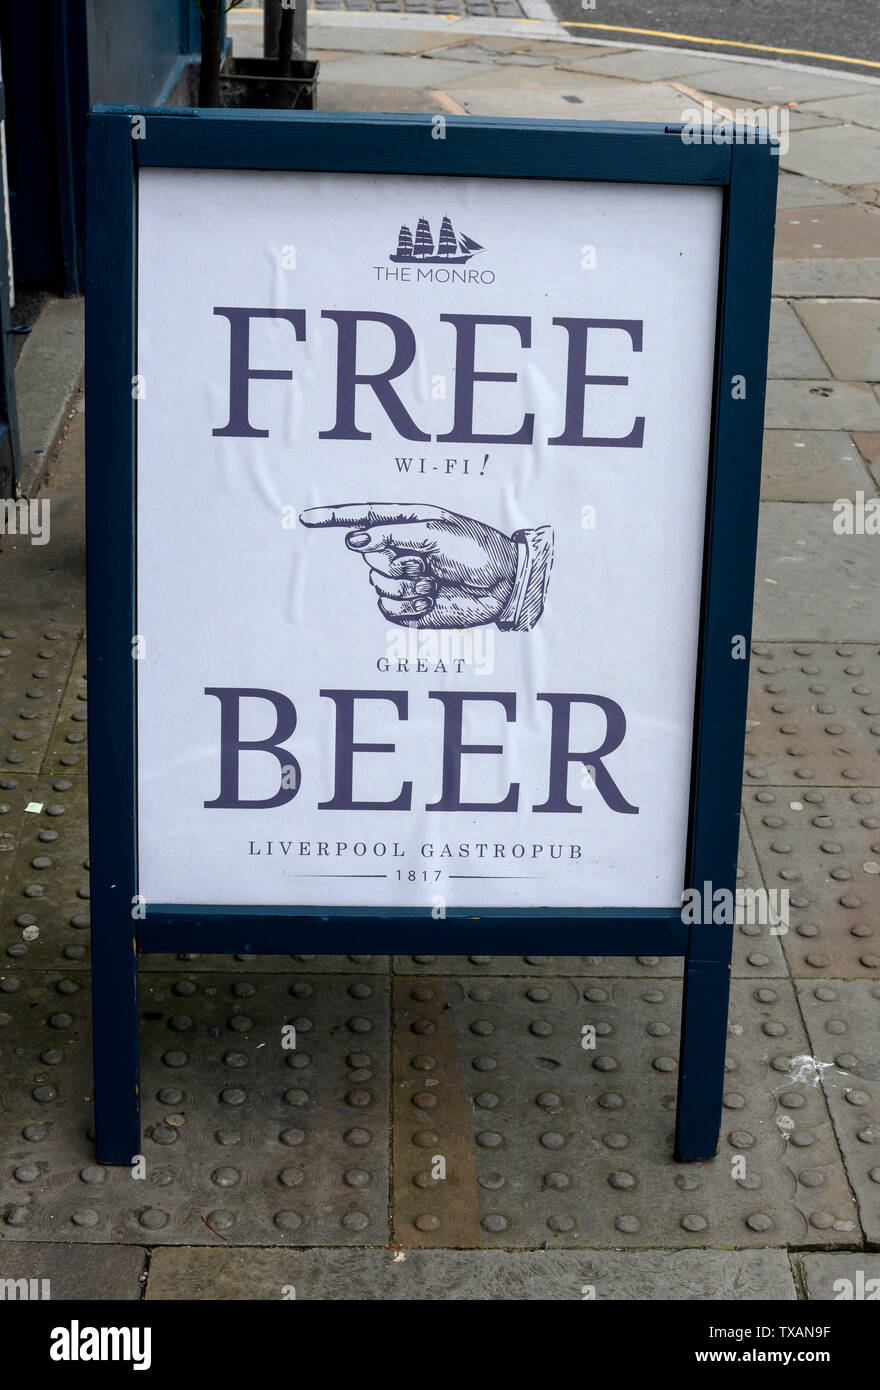 Humorous and misleading sign for 'Free Beer', Liverpool, England, UK. Stock Photo